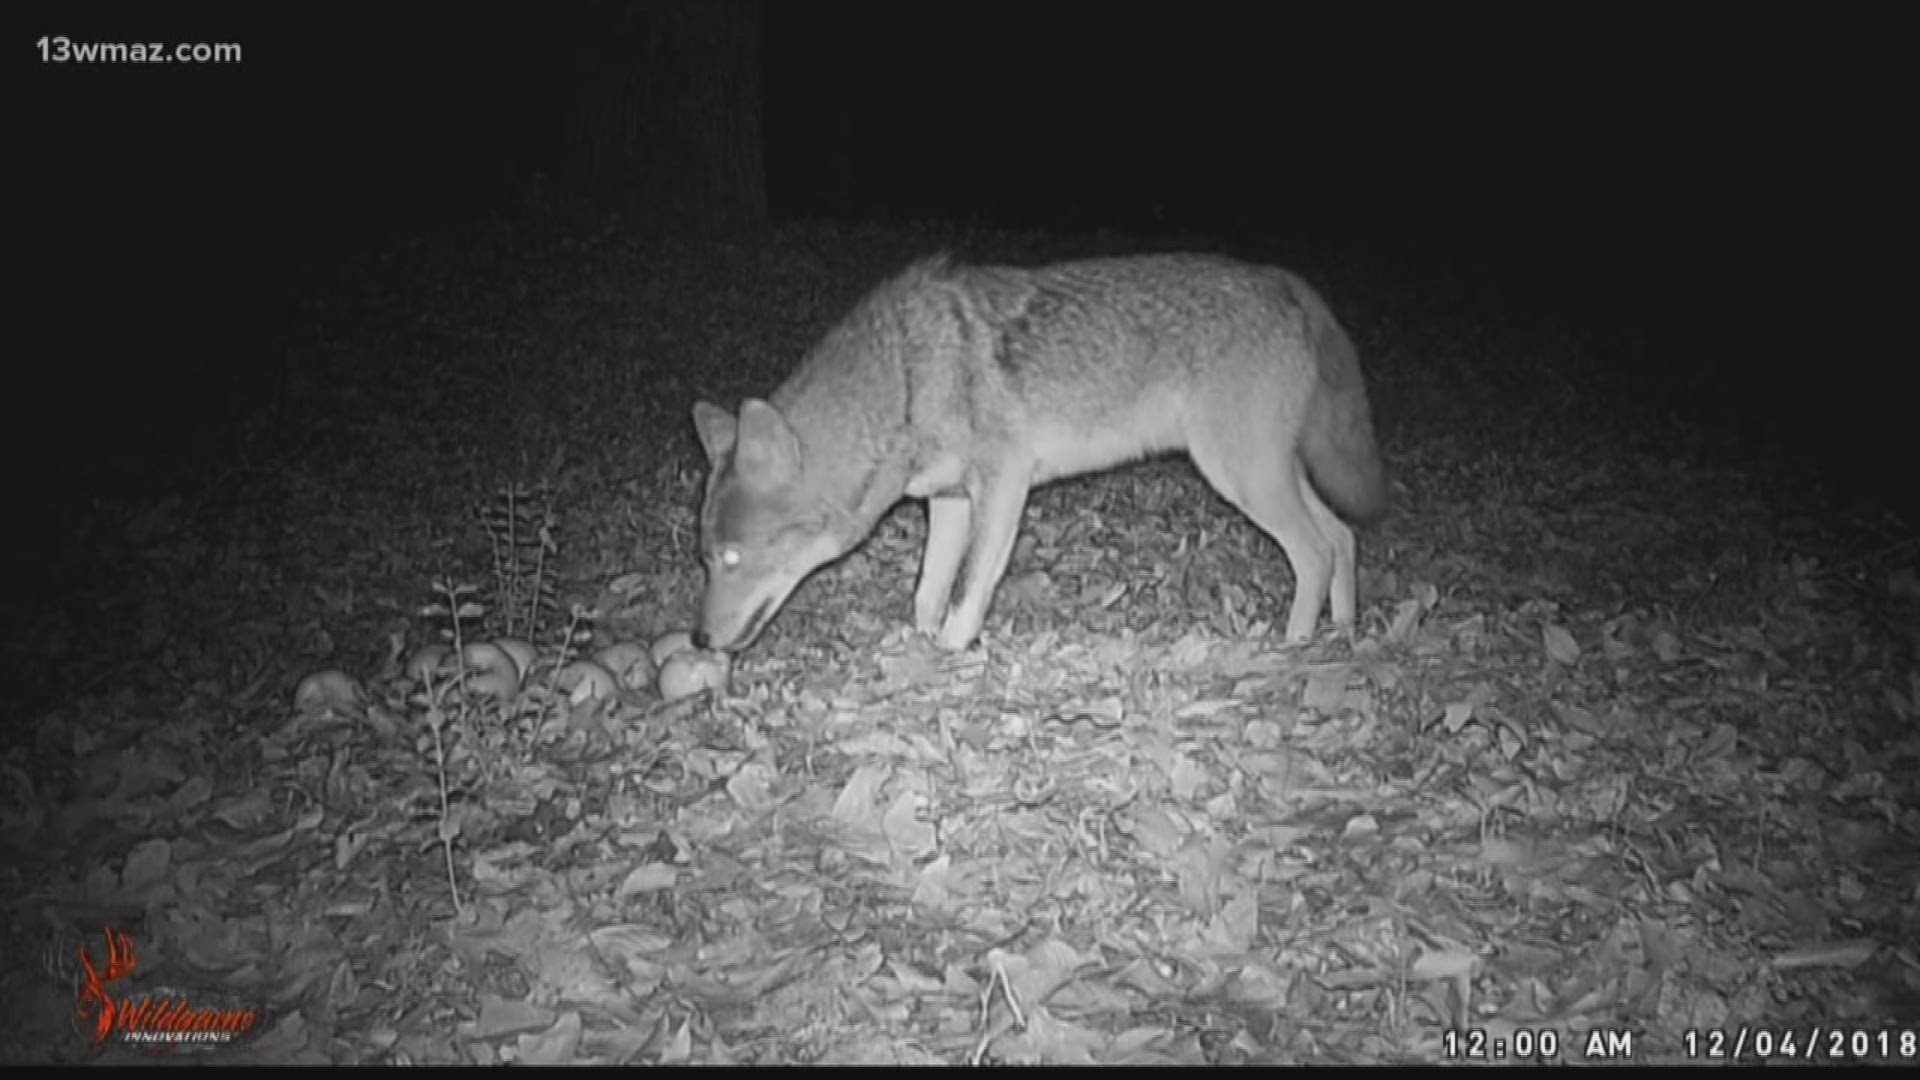 Coyotes roaming Forsyth become problematic